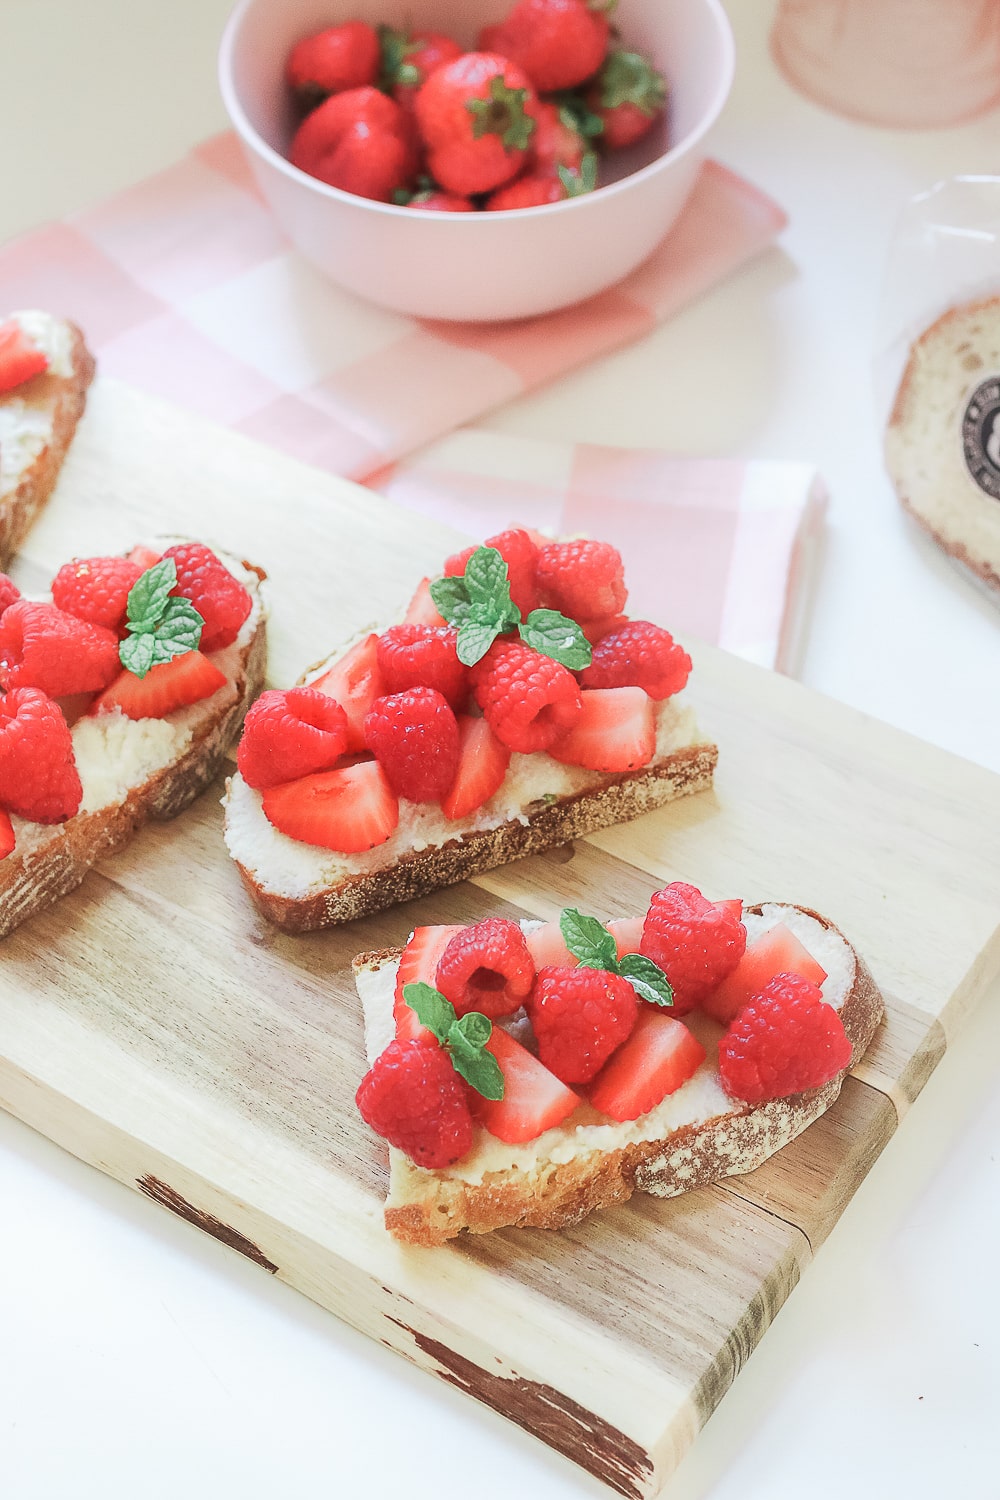 Fresh berry and ricotta cheese toast recipe by blogger Stephanie Ziajka on Diary of a Debutante